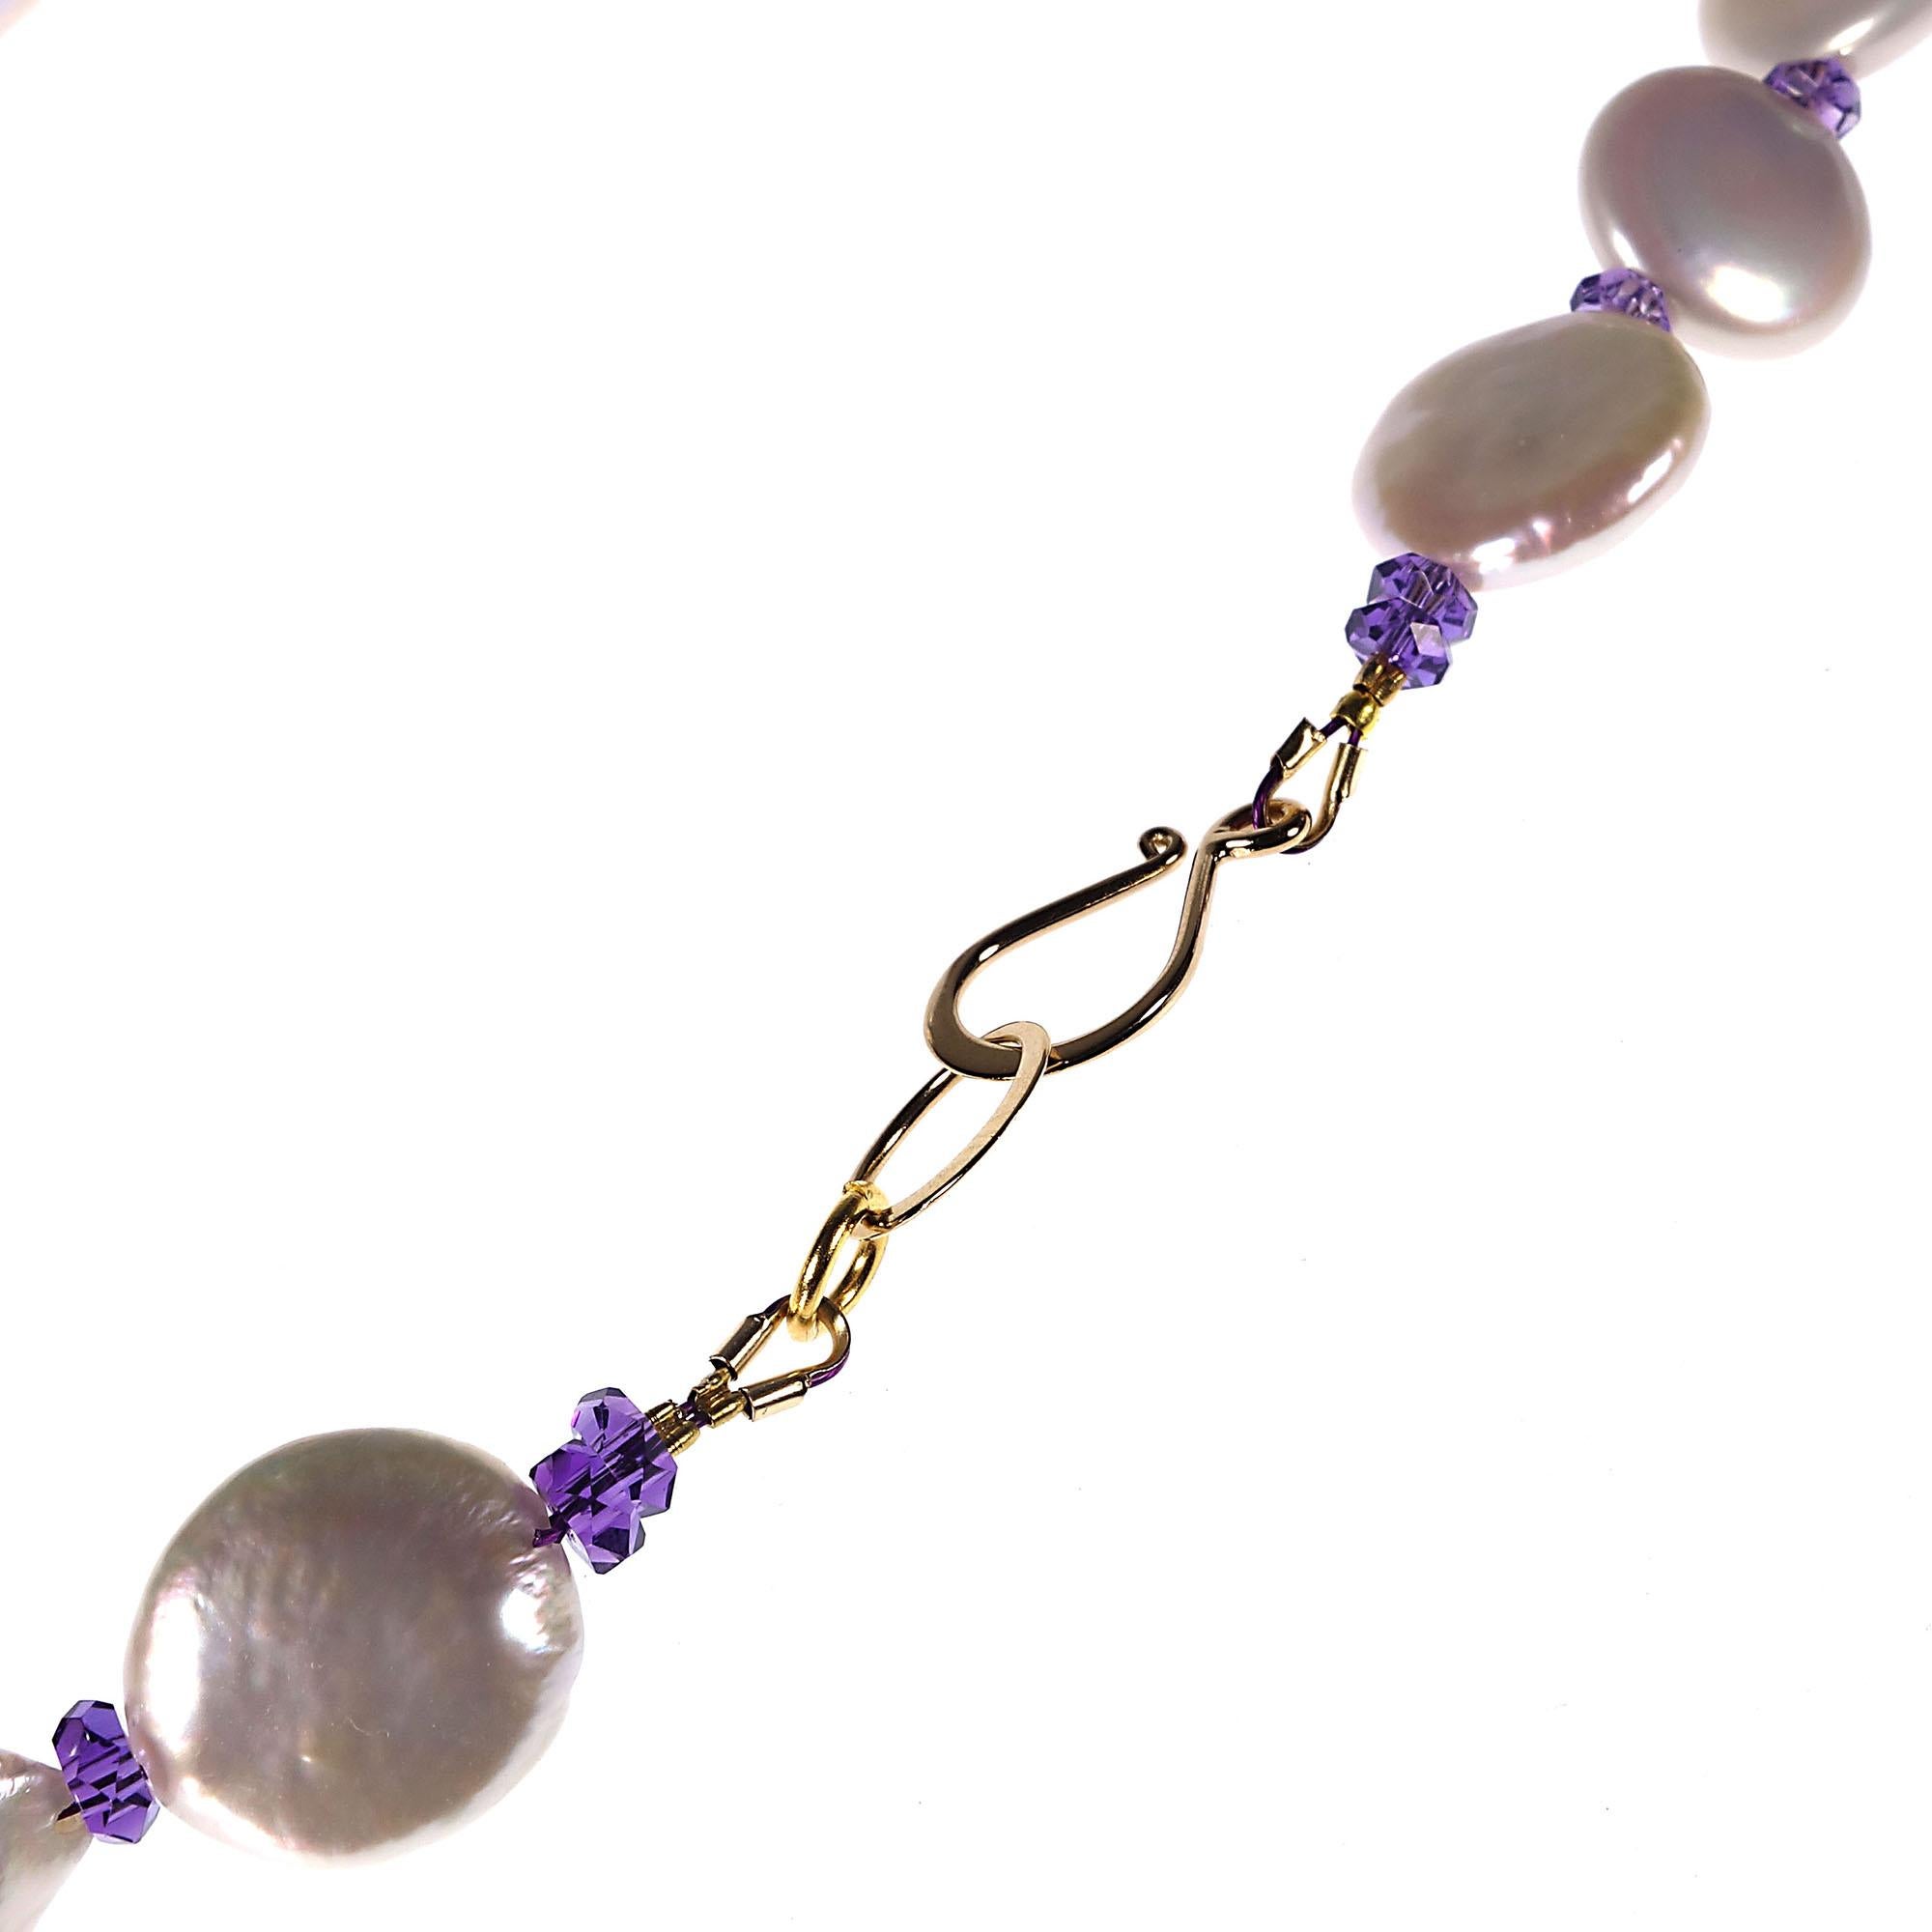 Bead AJD Glowing White Coin Pearl Choker Necklace  June Birthstone